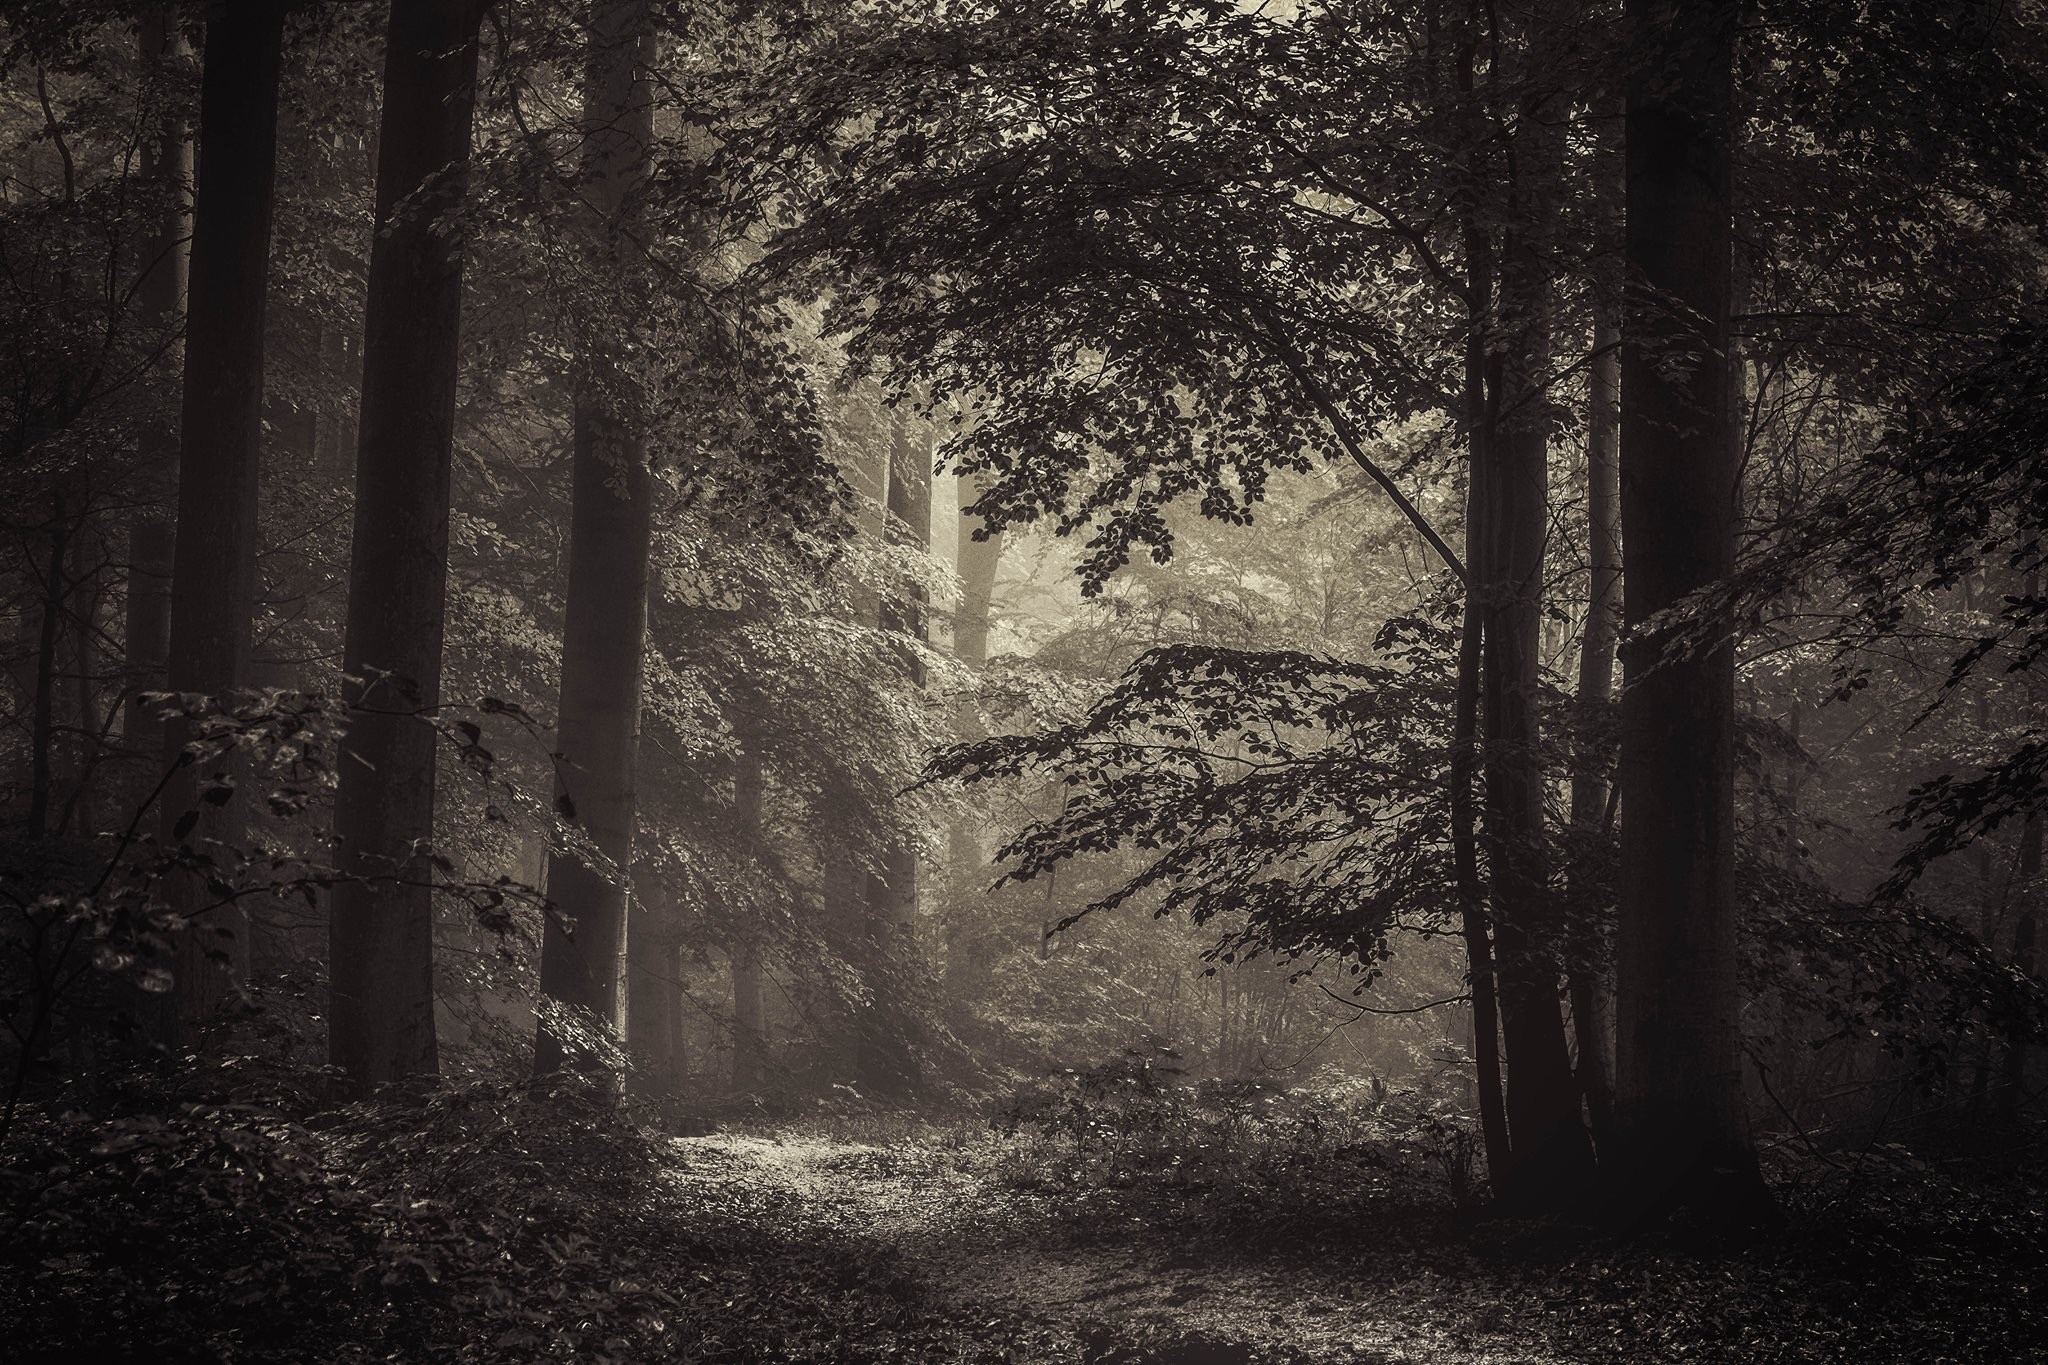 General 2048x1365 landscape nature forest sepia trees outdoors